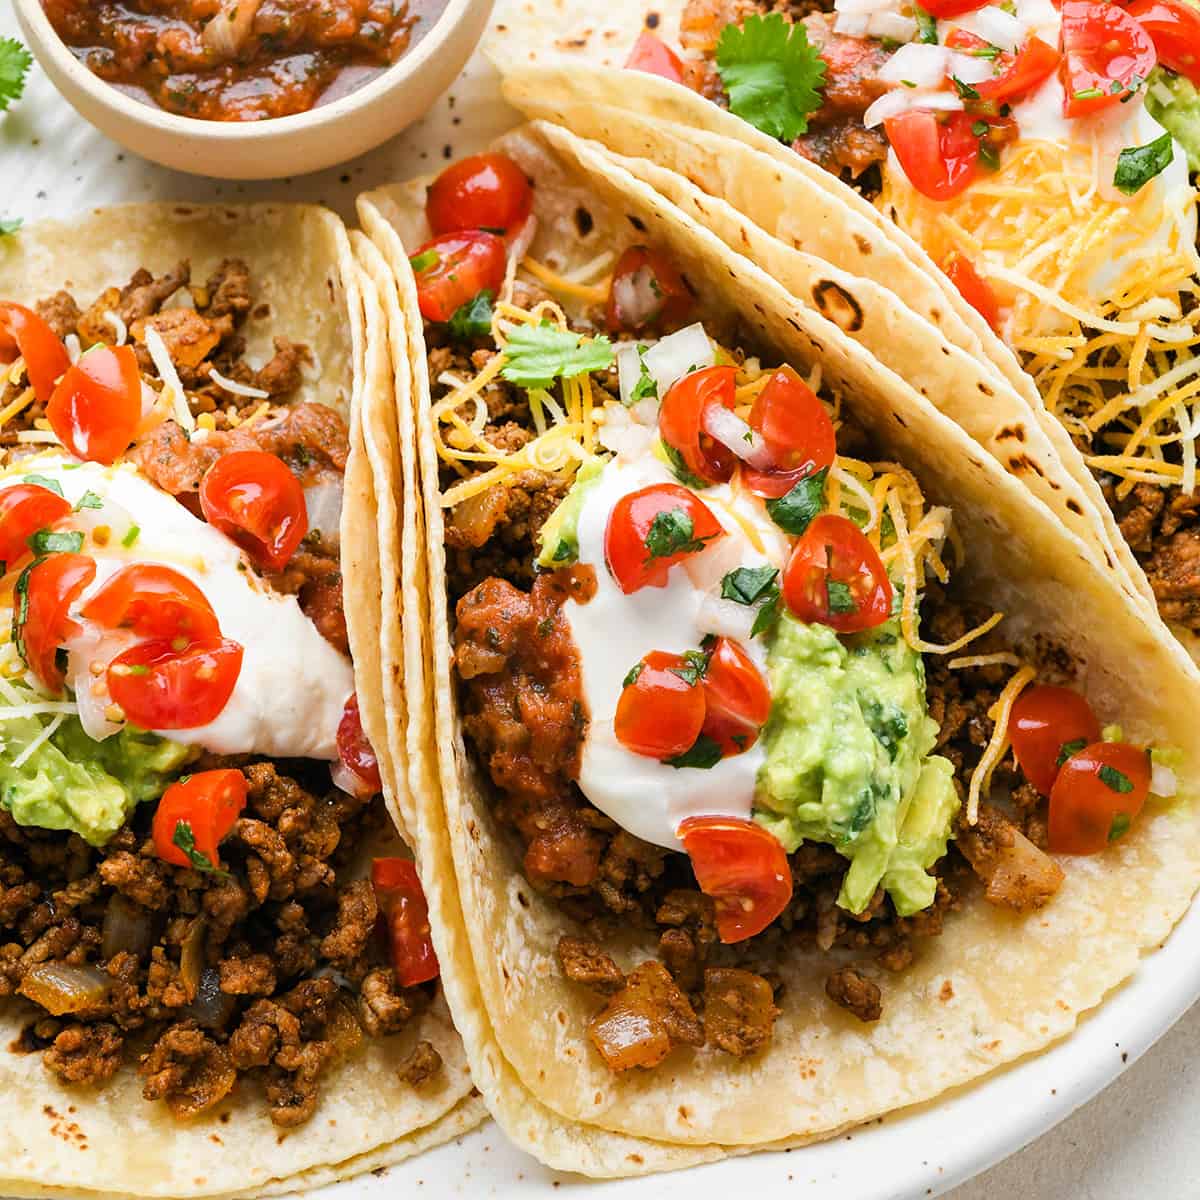 3 Ground Beef Tacos on a plate with sour cream, cheese, guacamole and tomatoes